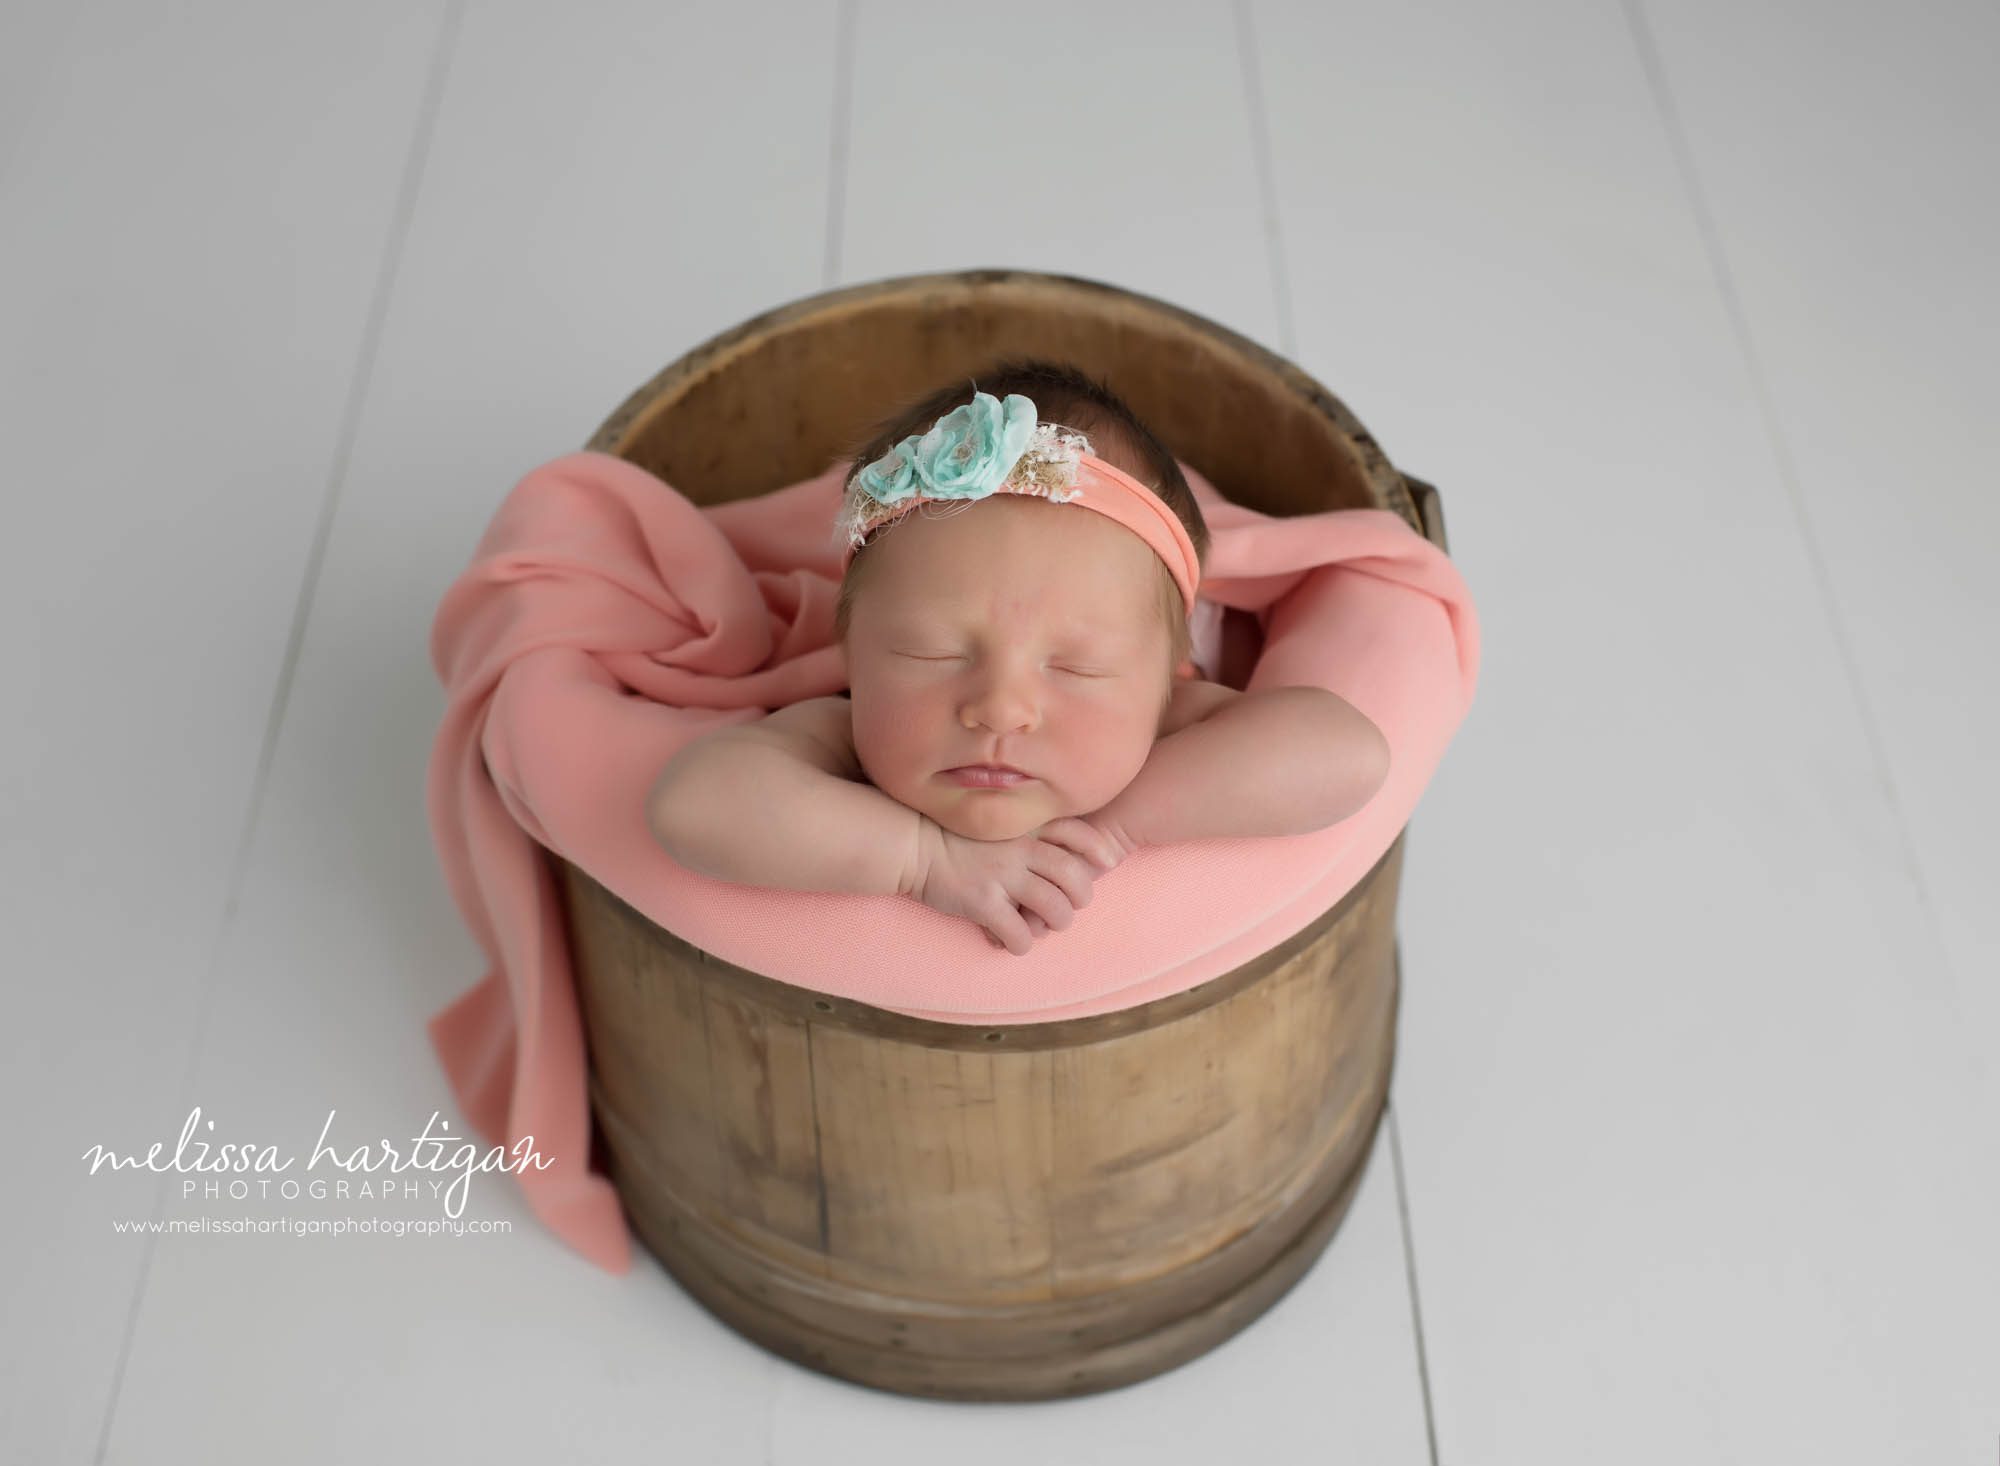 Newborn baby girl posed in wooden prop bucket with coral wrap and coral headband Newborn baby photography CT